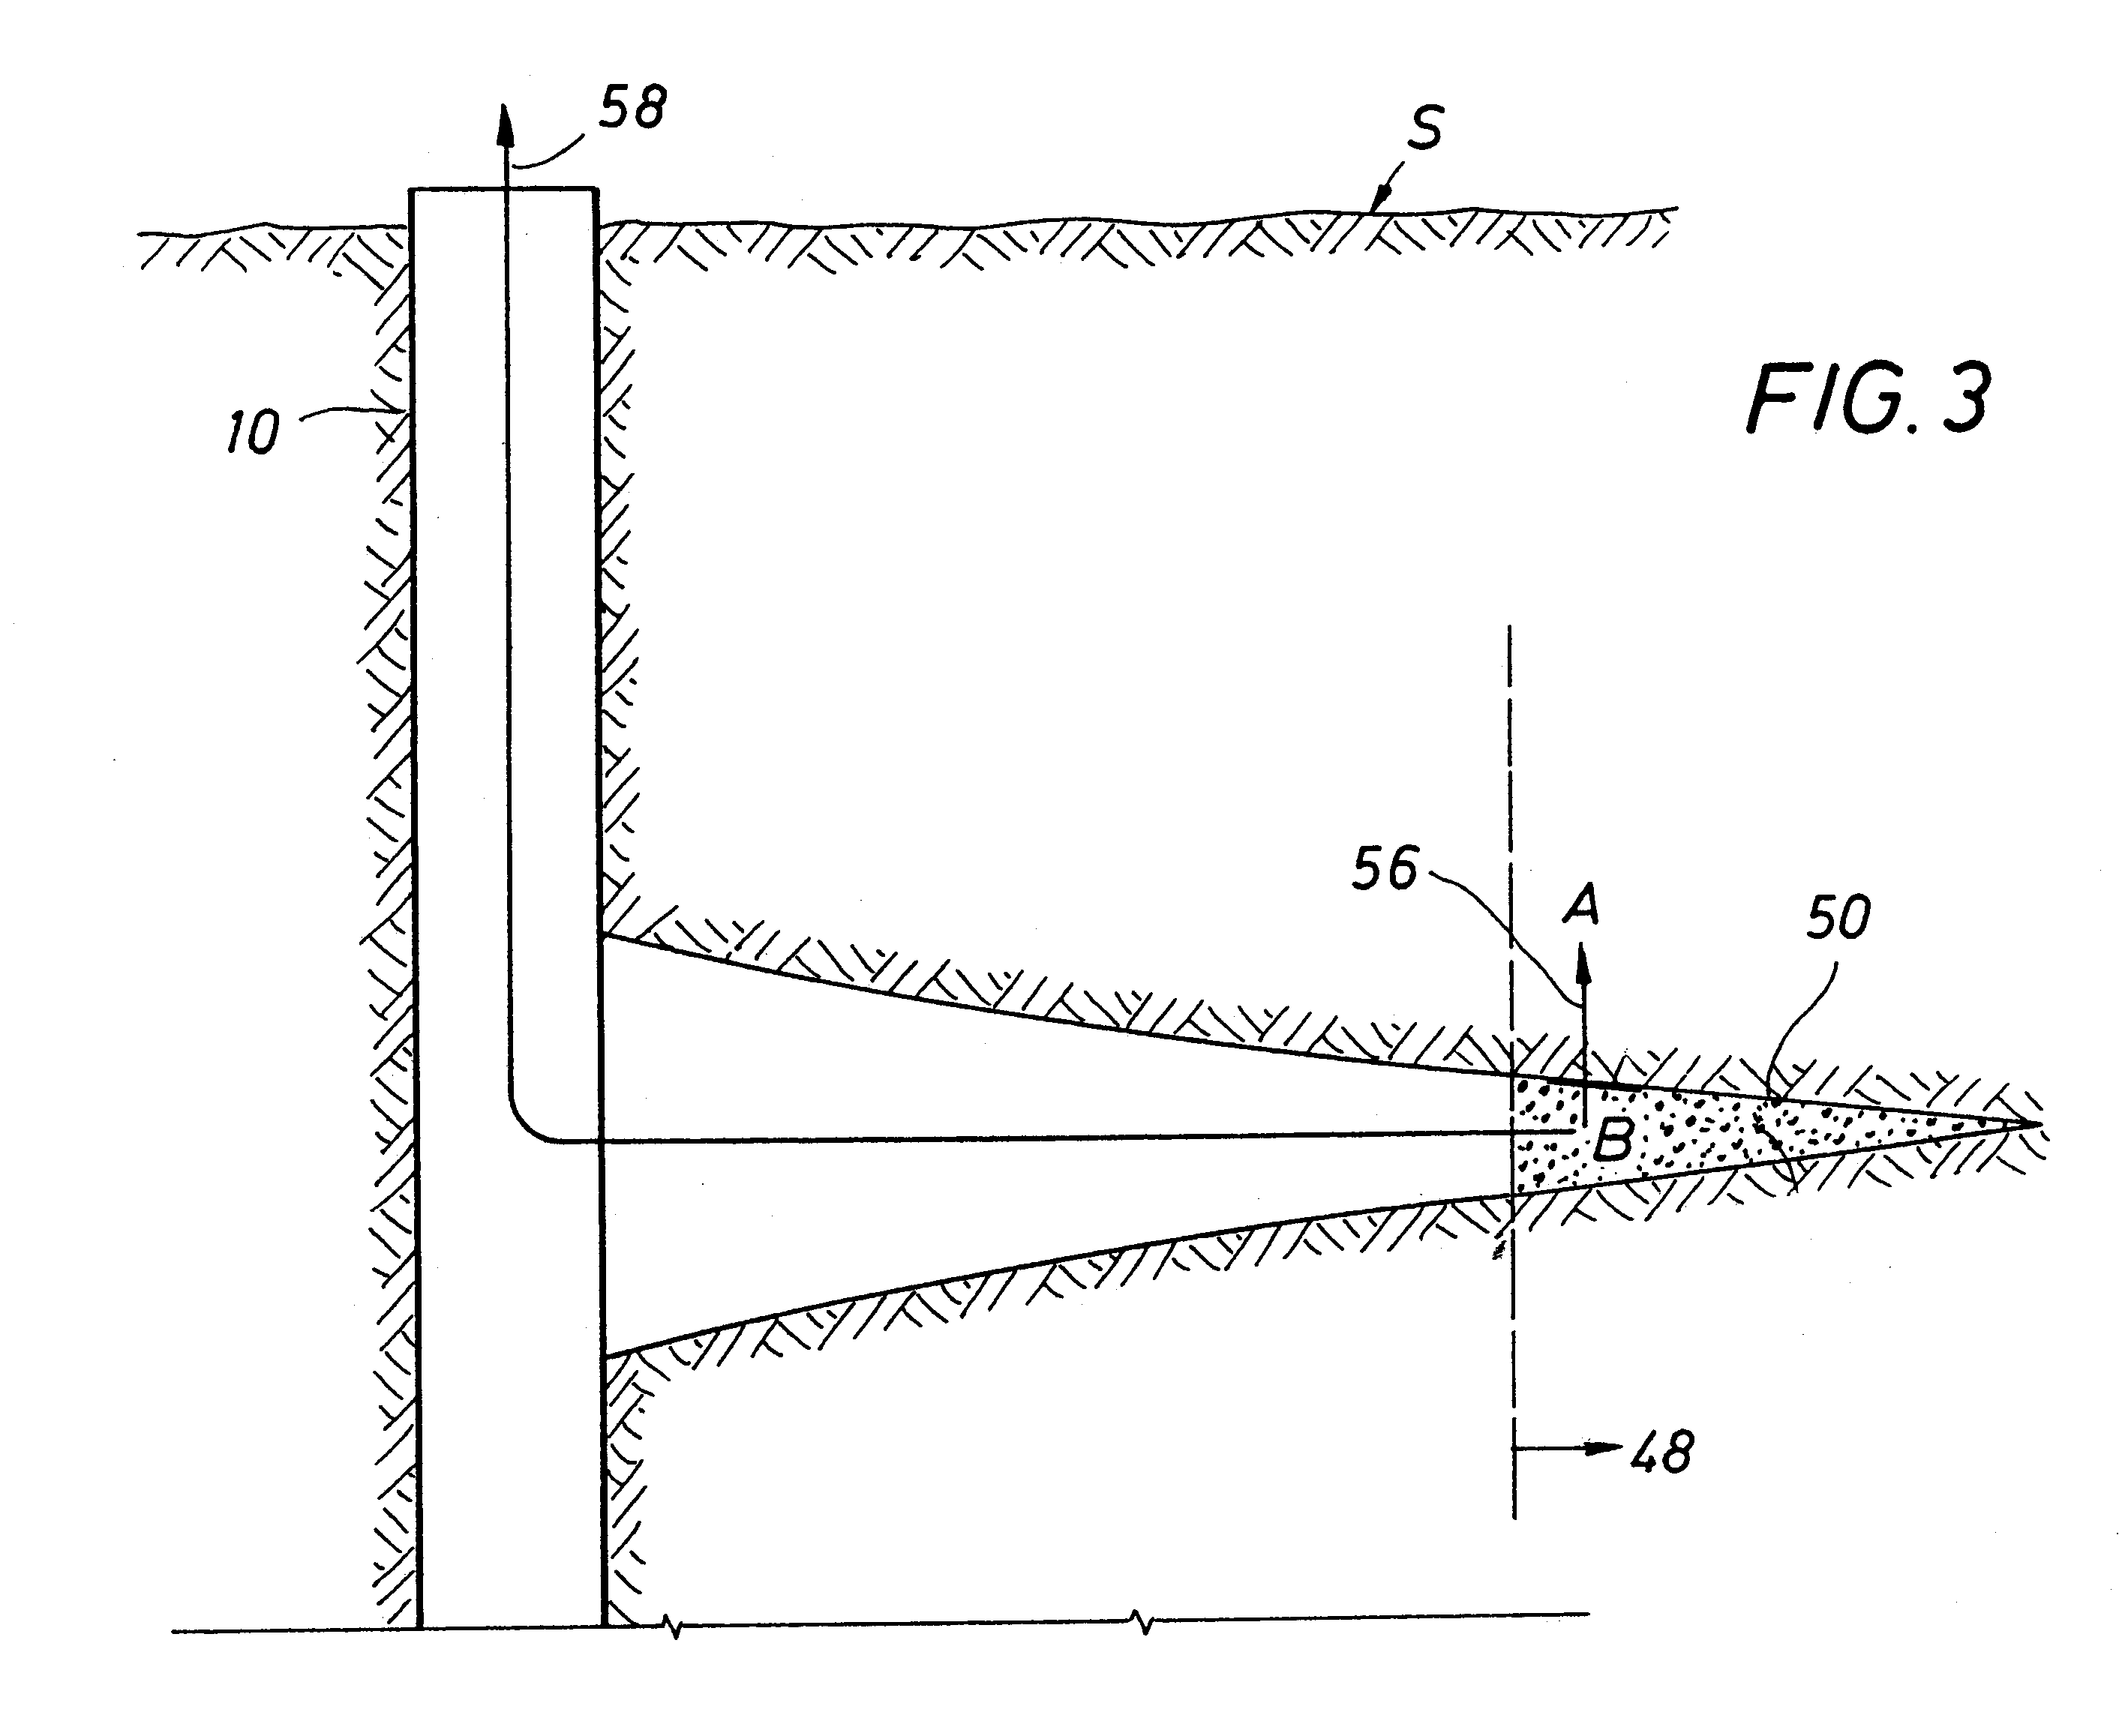 Method and apparatus for deliberate fluid removal by capillary imbibition